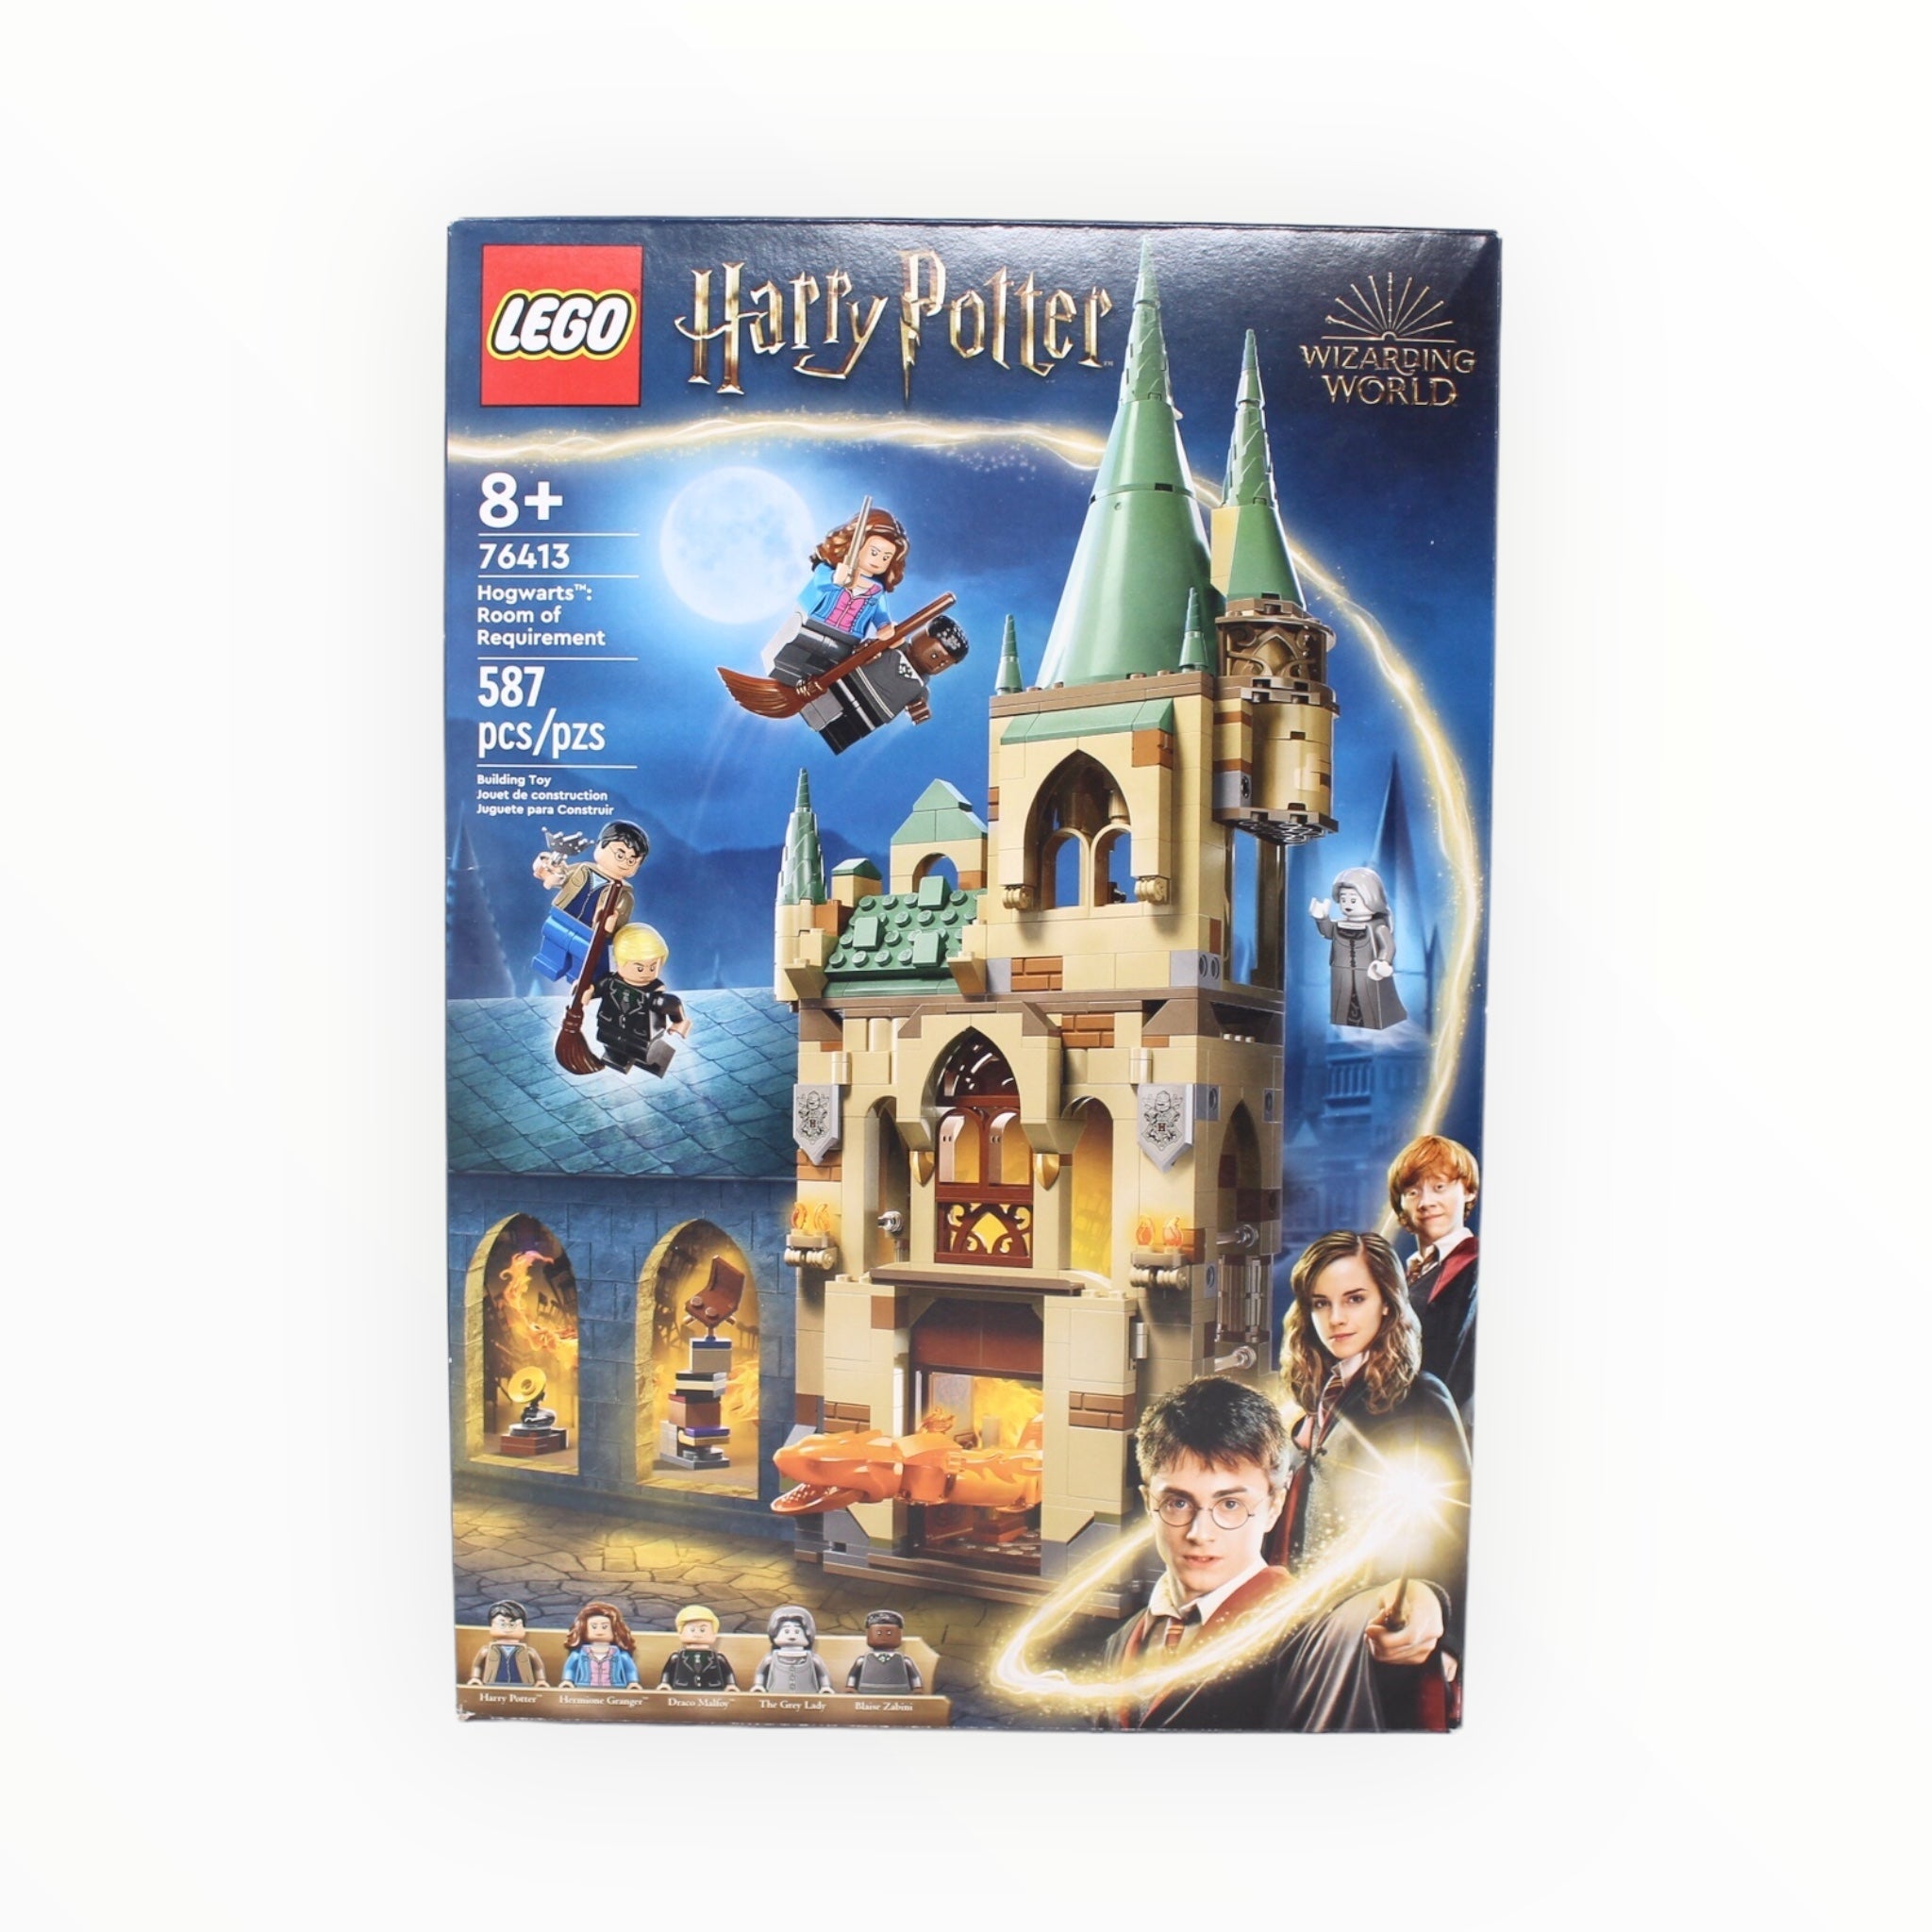 Certified Used Set 76413 Harry Potter Hogwarts: Room of Requirement